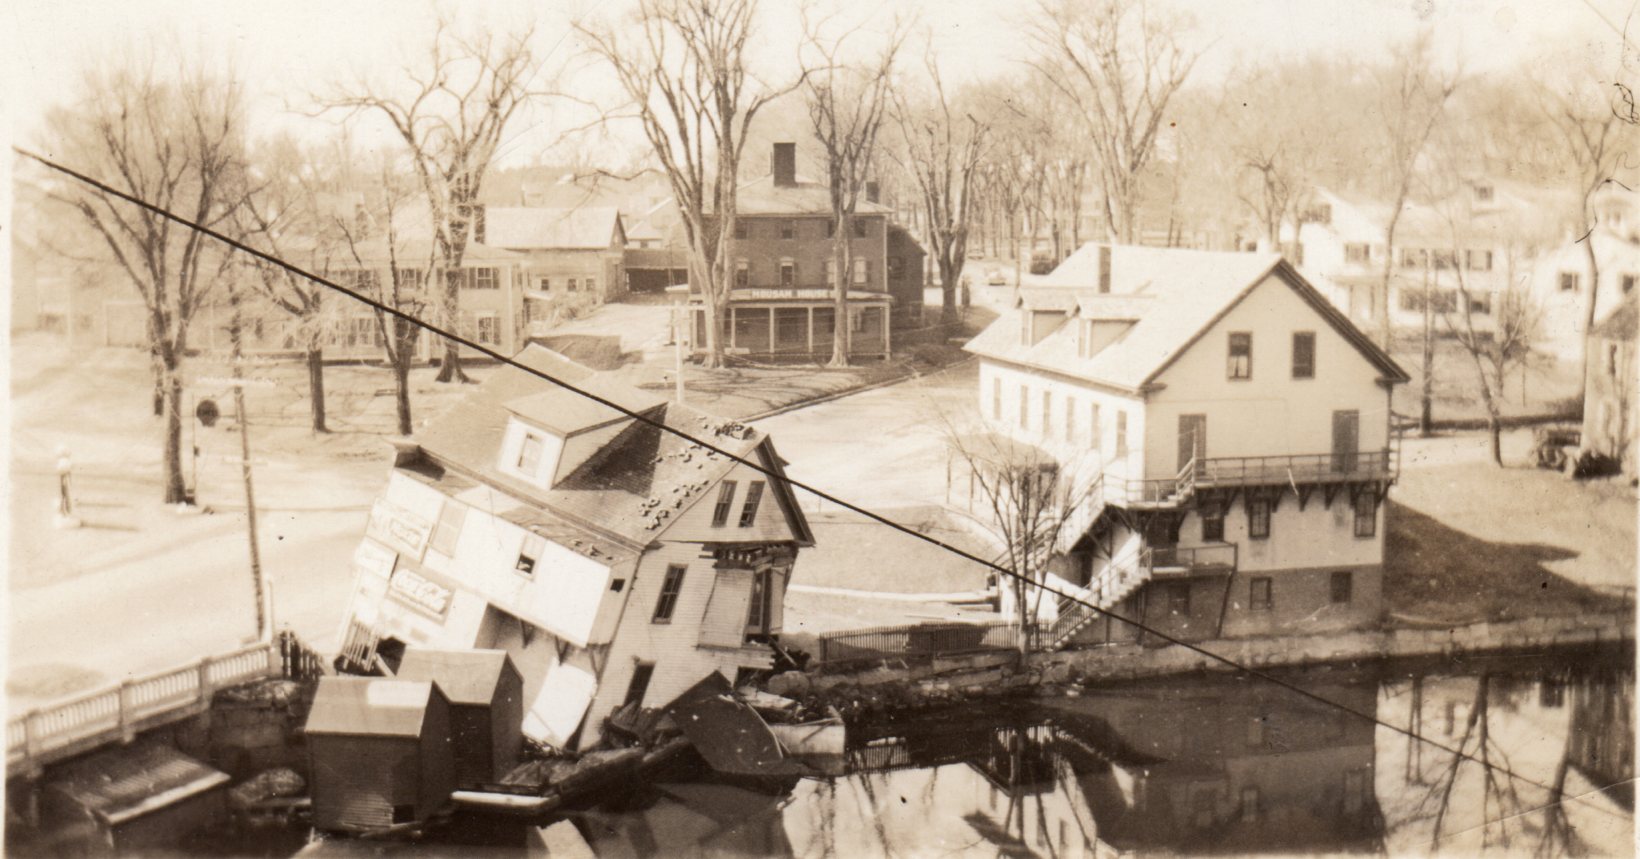 Tomlinson's store on the Mousam River after being damaged by the great flood of 1936.